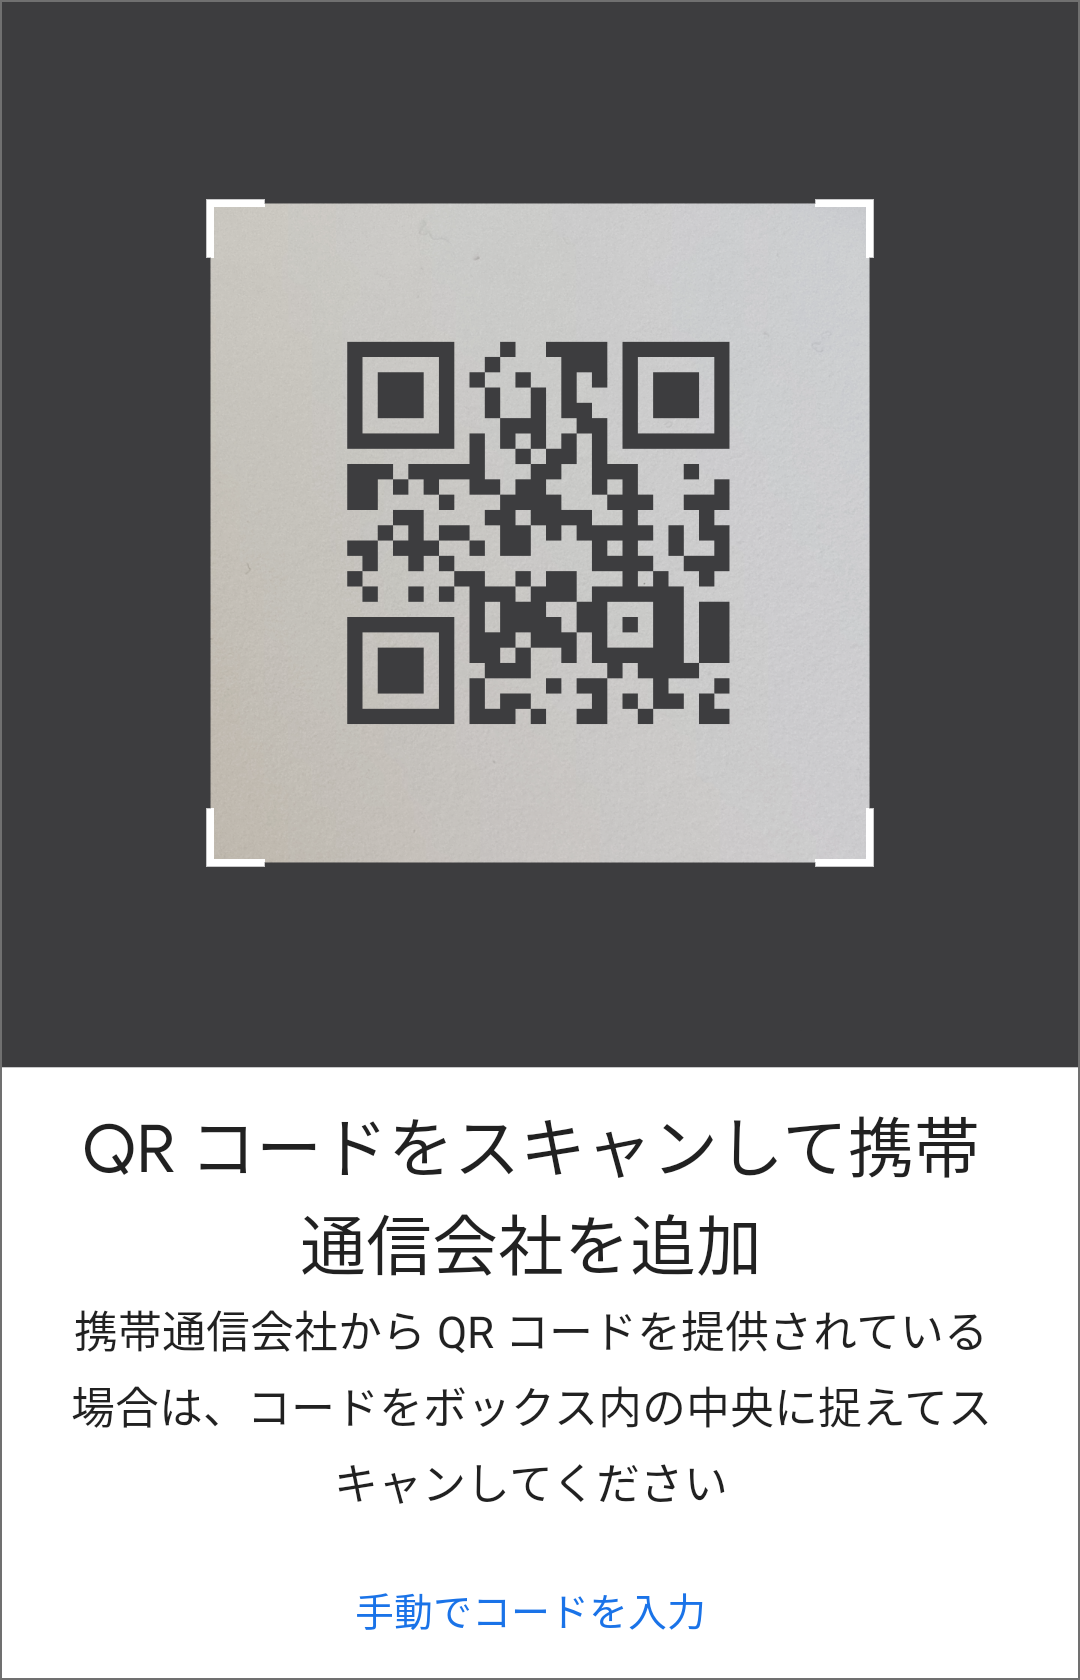 Android scan QR code